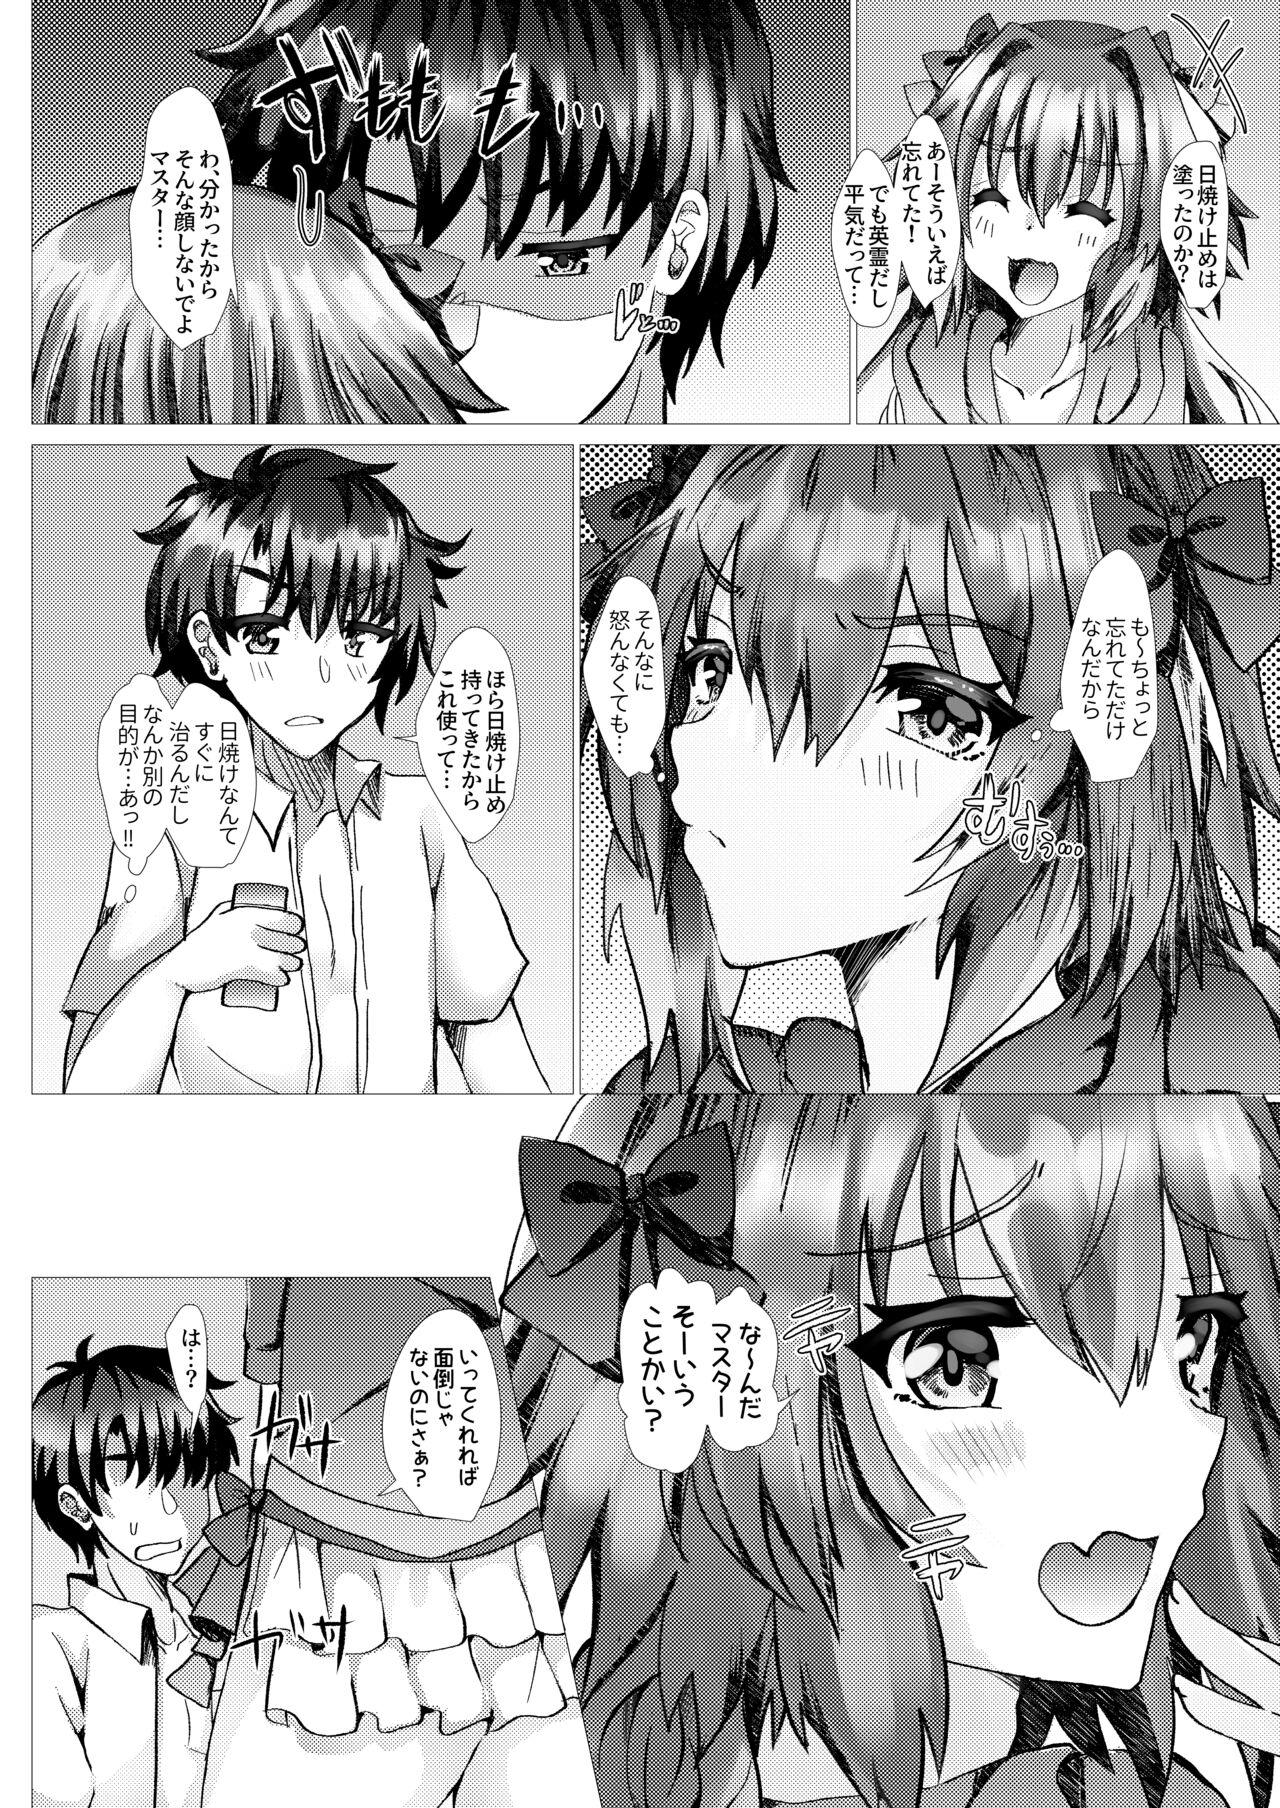 Pasivo Astolfo to Summer Vacation + Omake - Fate grand order Cumshot - Page 3